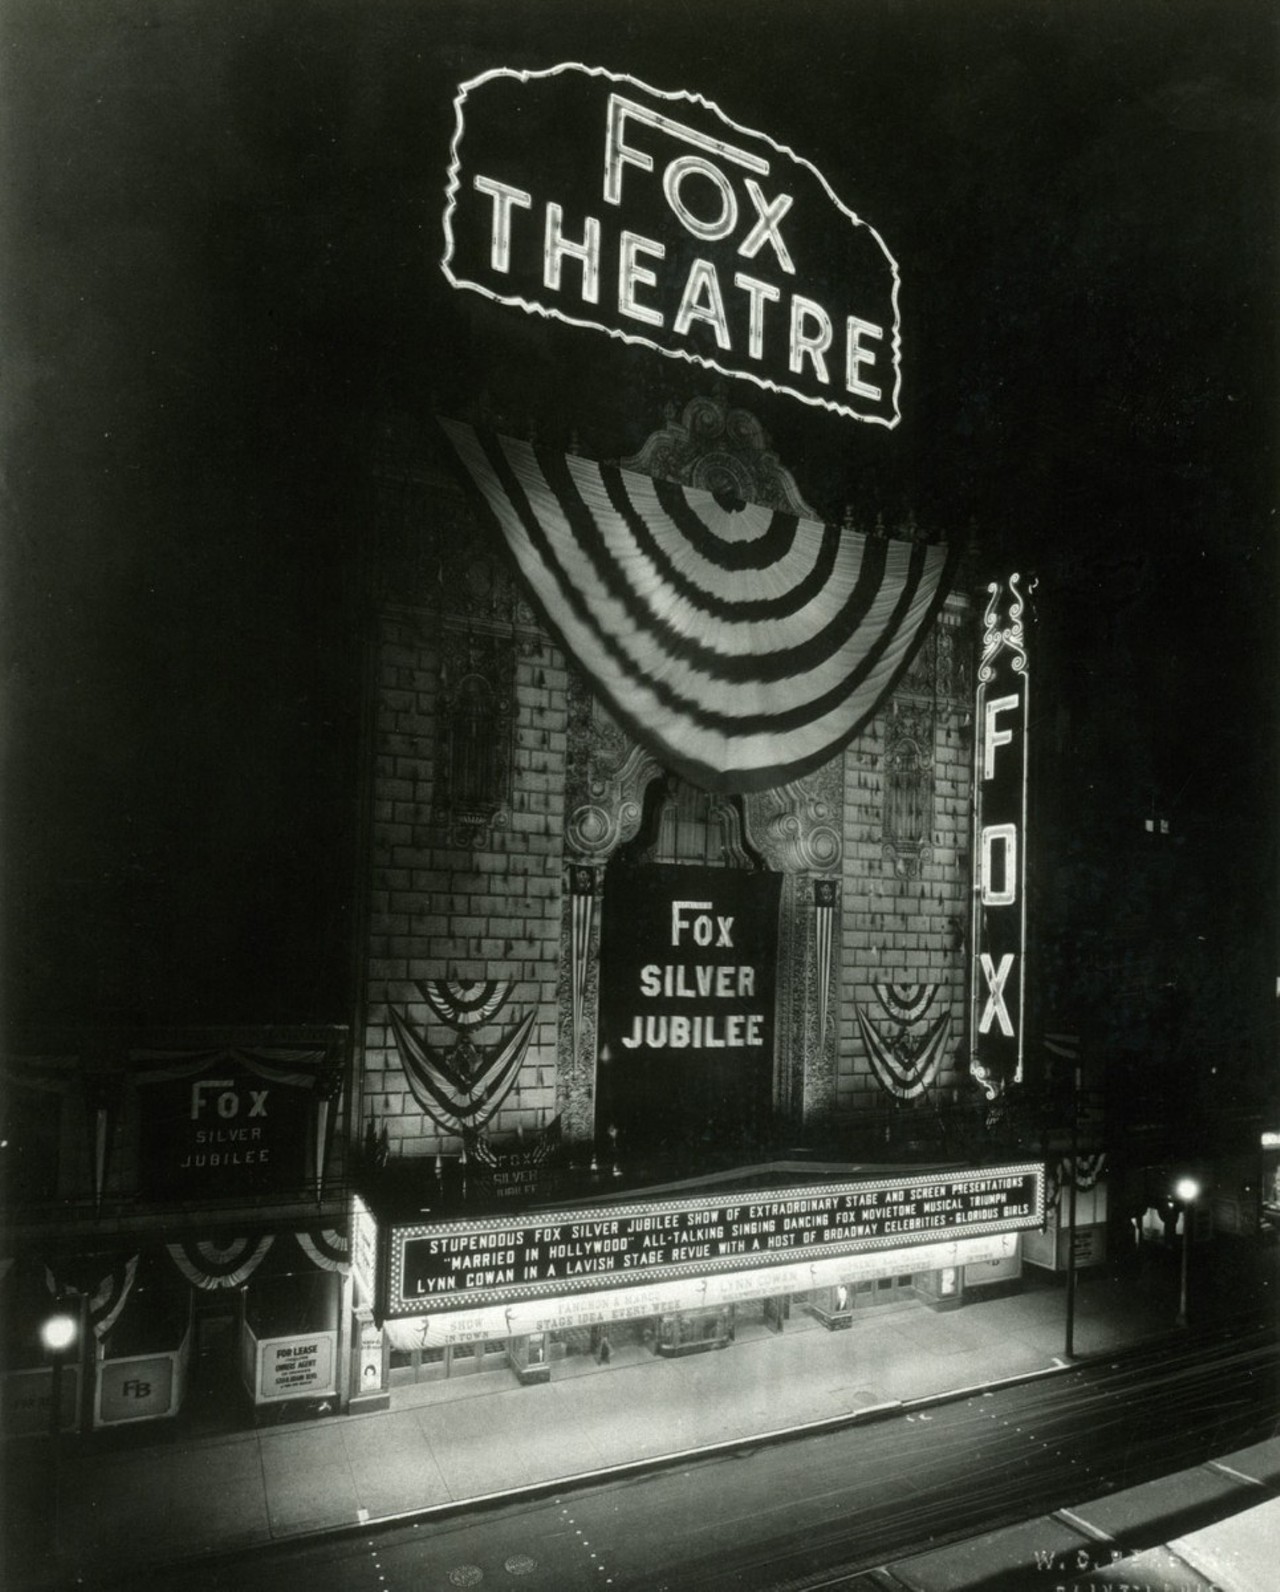 The Fox chain celebrated its Jubilee Anniversay in 1930.Photo courtesy of MO Historical Society.